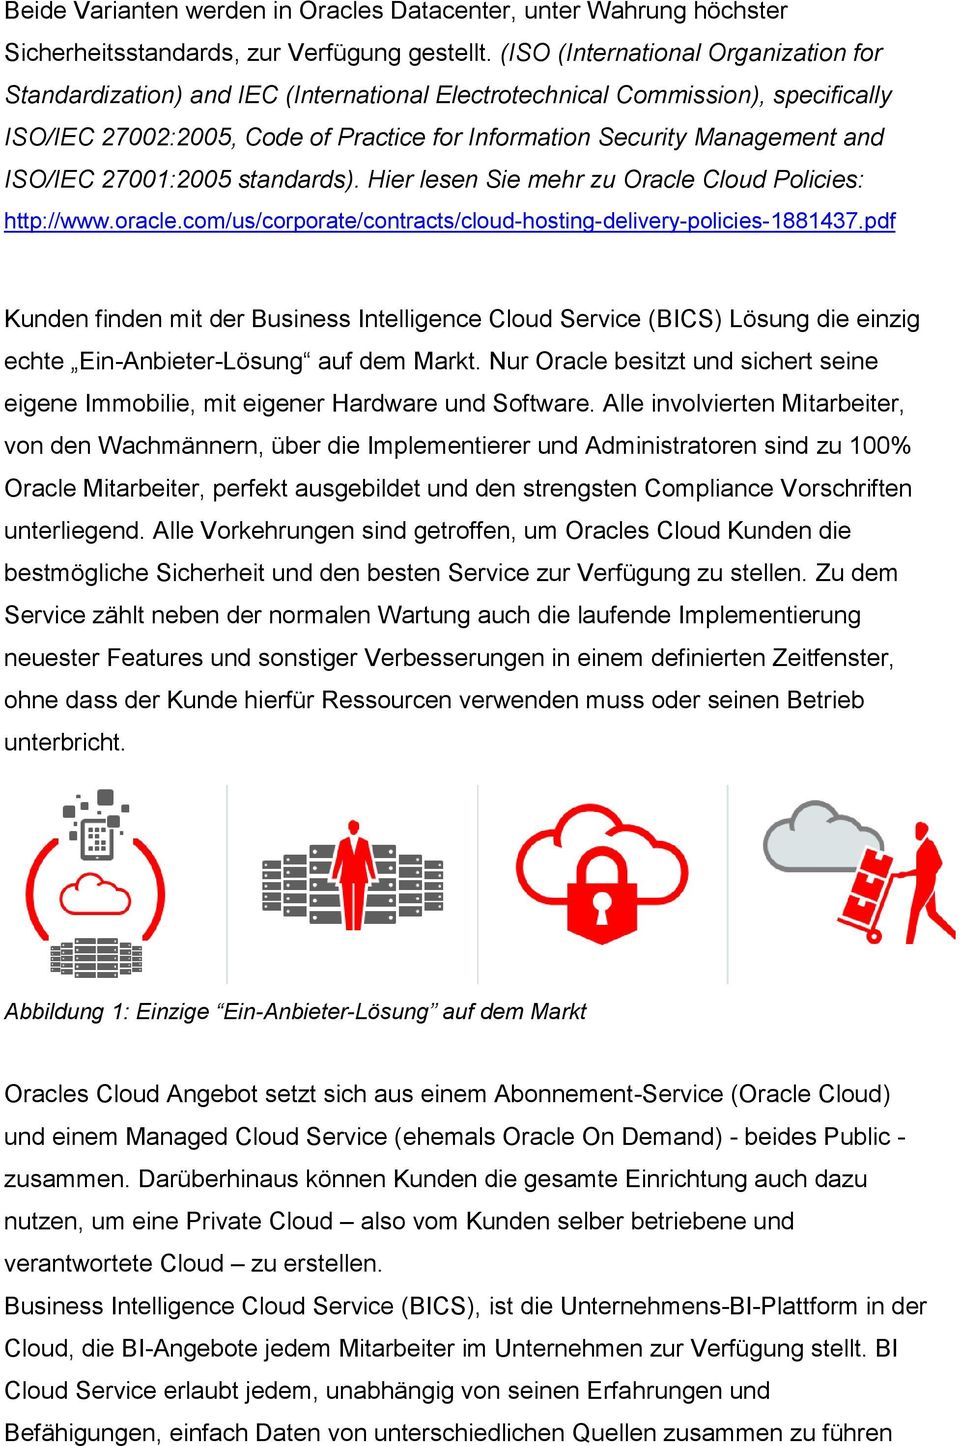 ISO/IEC 27001:2005 standards). Hier lesen Sie mehr zu Oracle Cloud Policies: http://www.oracle.com/us/corporate/contracts/cloud-hosting-delivery-policies-1881437.